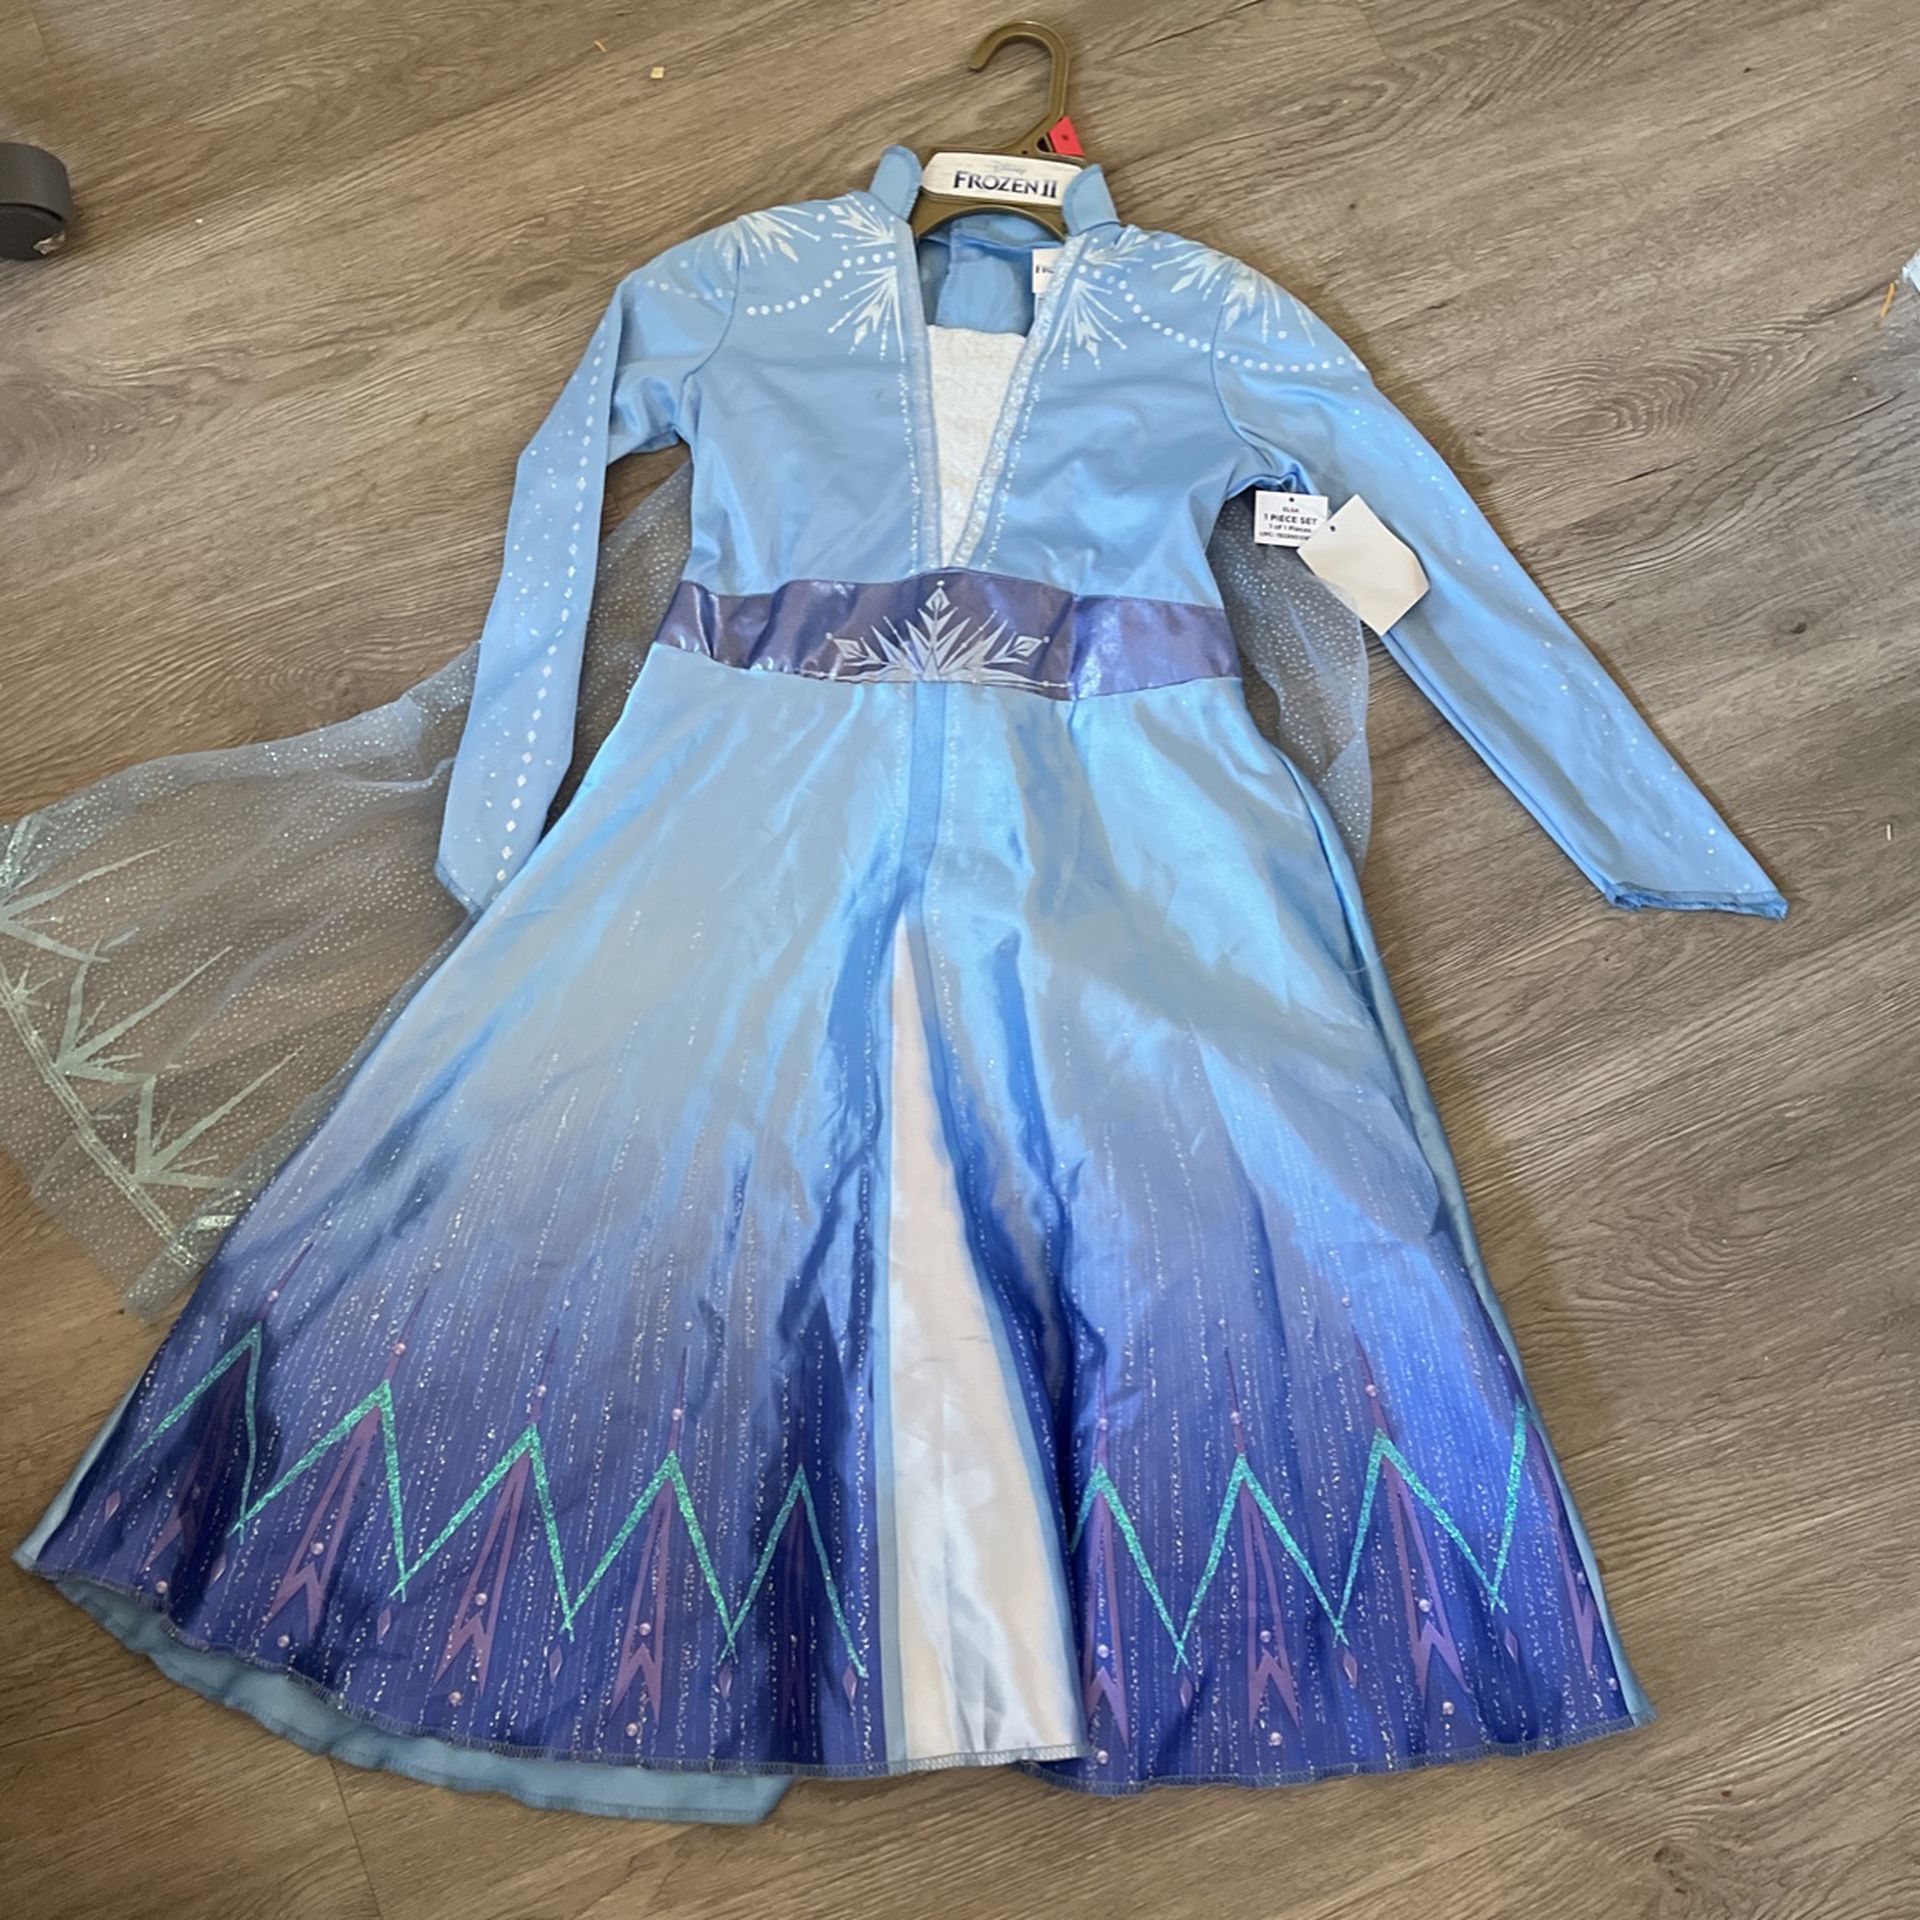 Frozen Costume Size Small (4-6) Brand New (has little stain from storage)